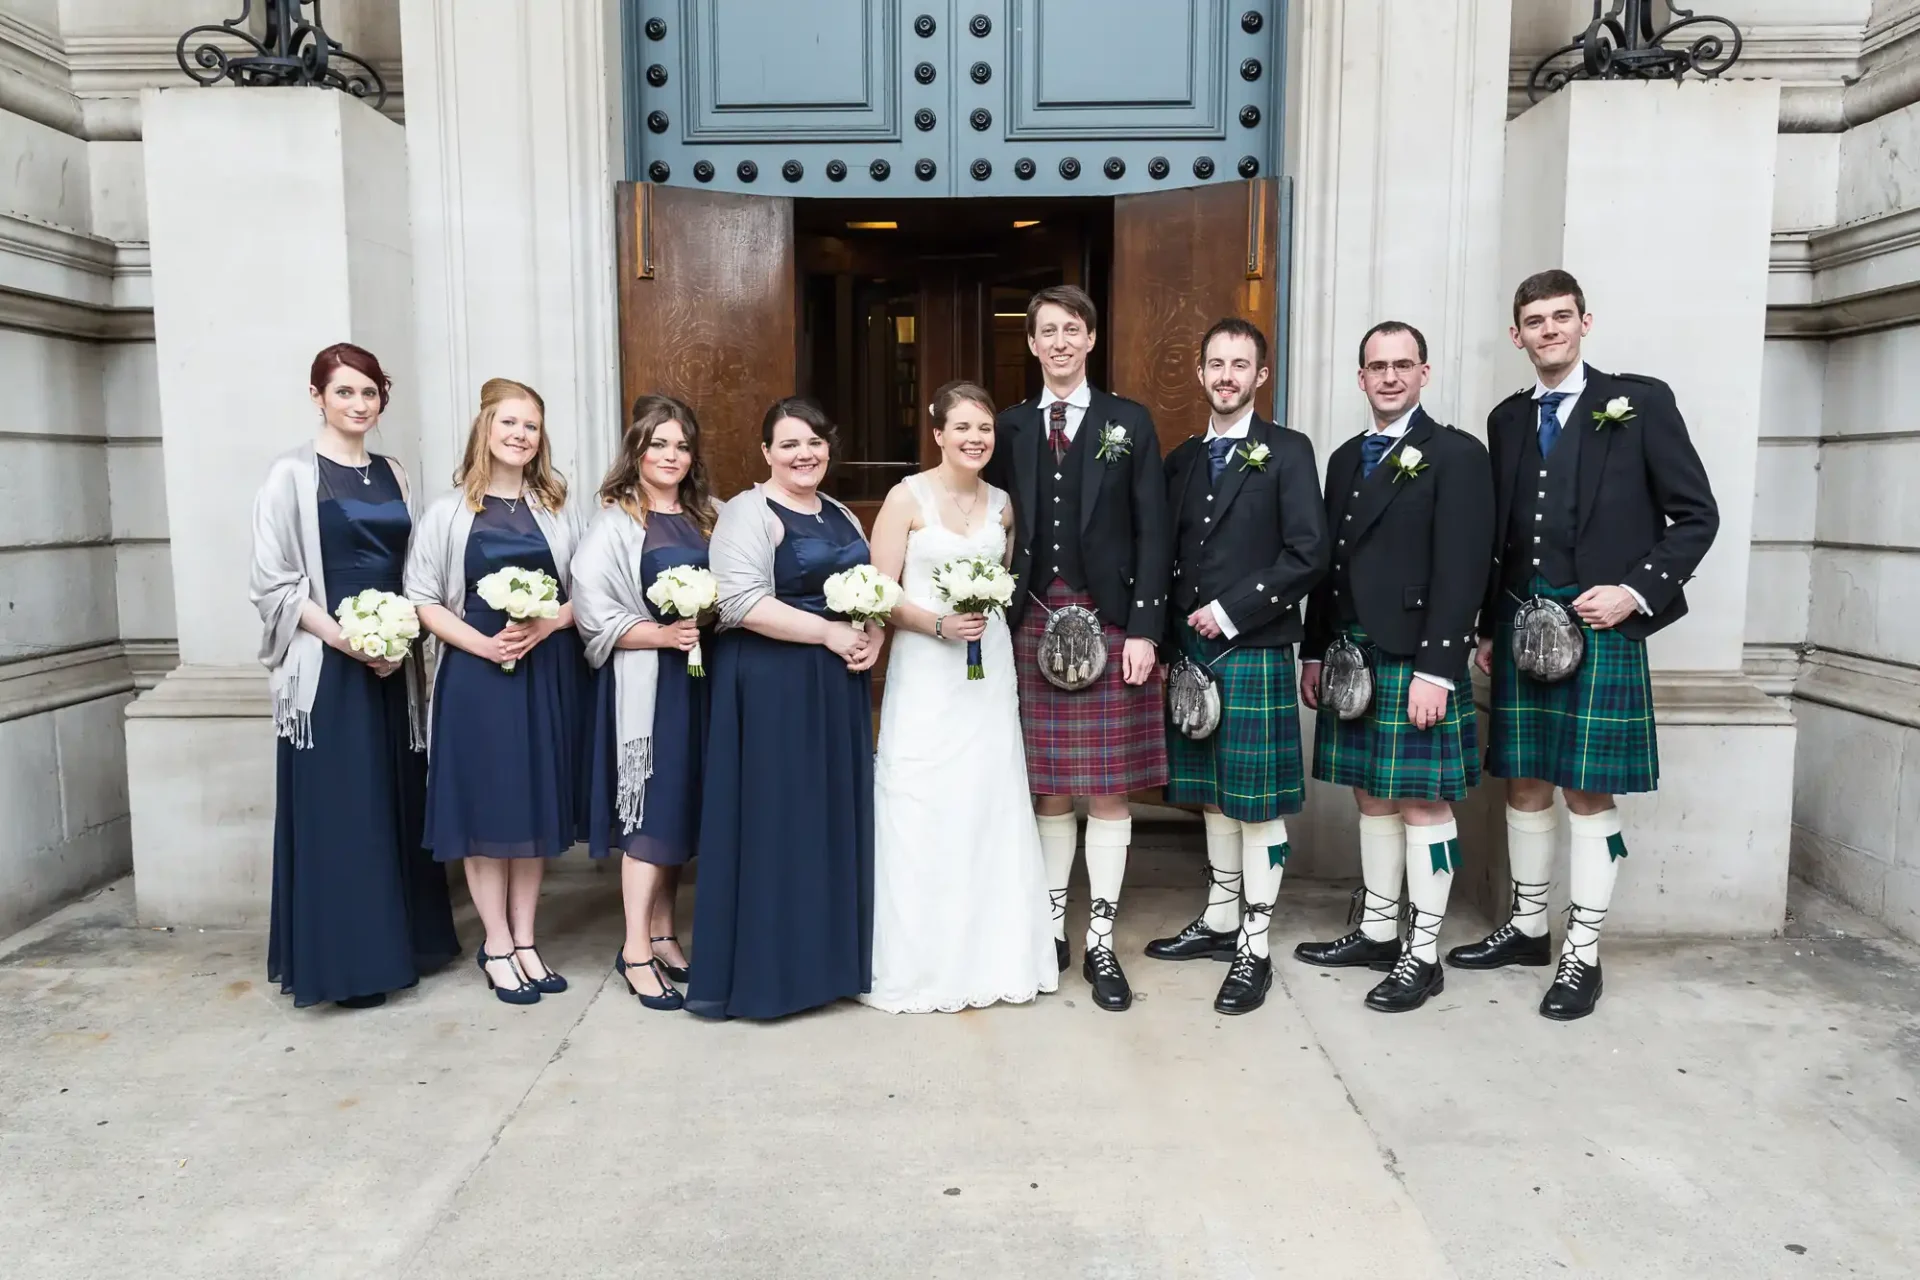 A wedding group posing in front of a building, with the bride and groom flanked by bridesmaids in blue and groomsmen in kilts.